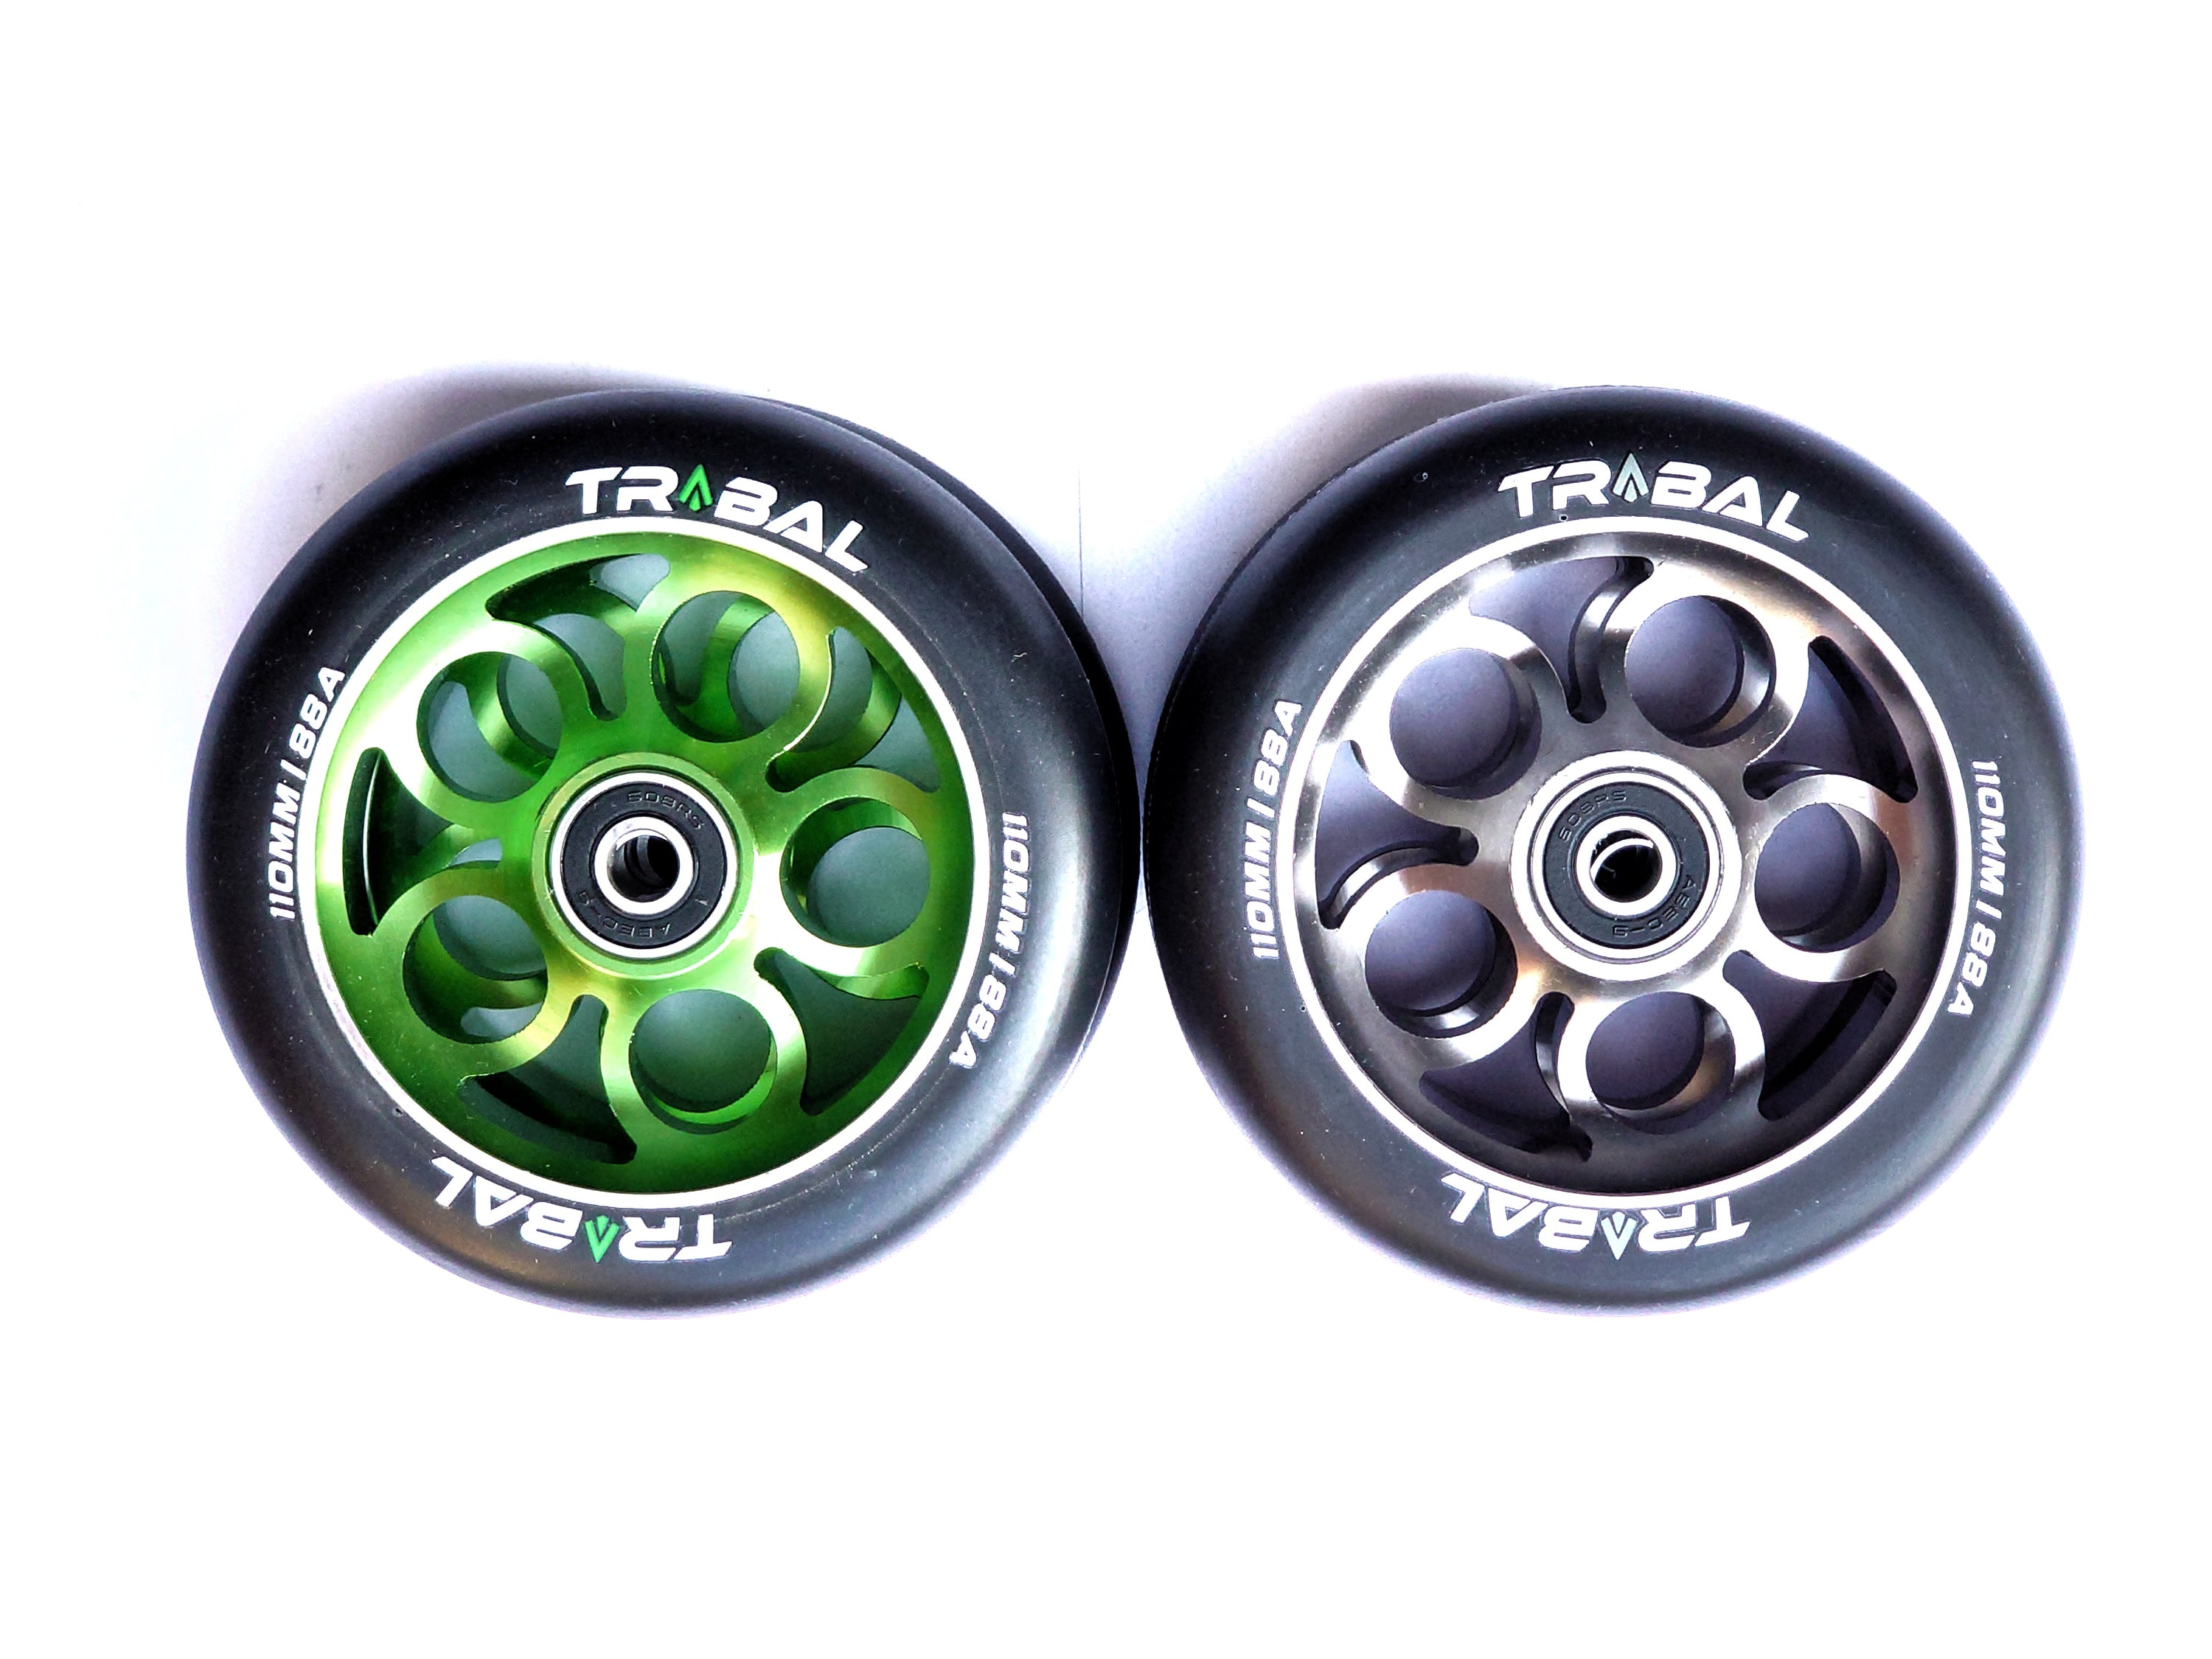 Tribal Alloy 110mm Scooter Wheels (Pair)